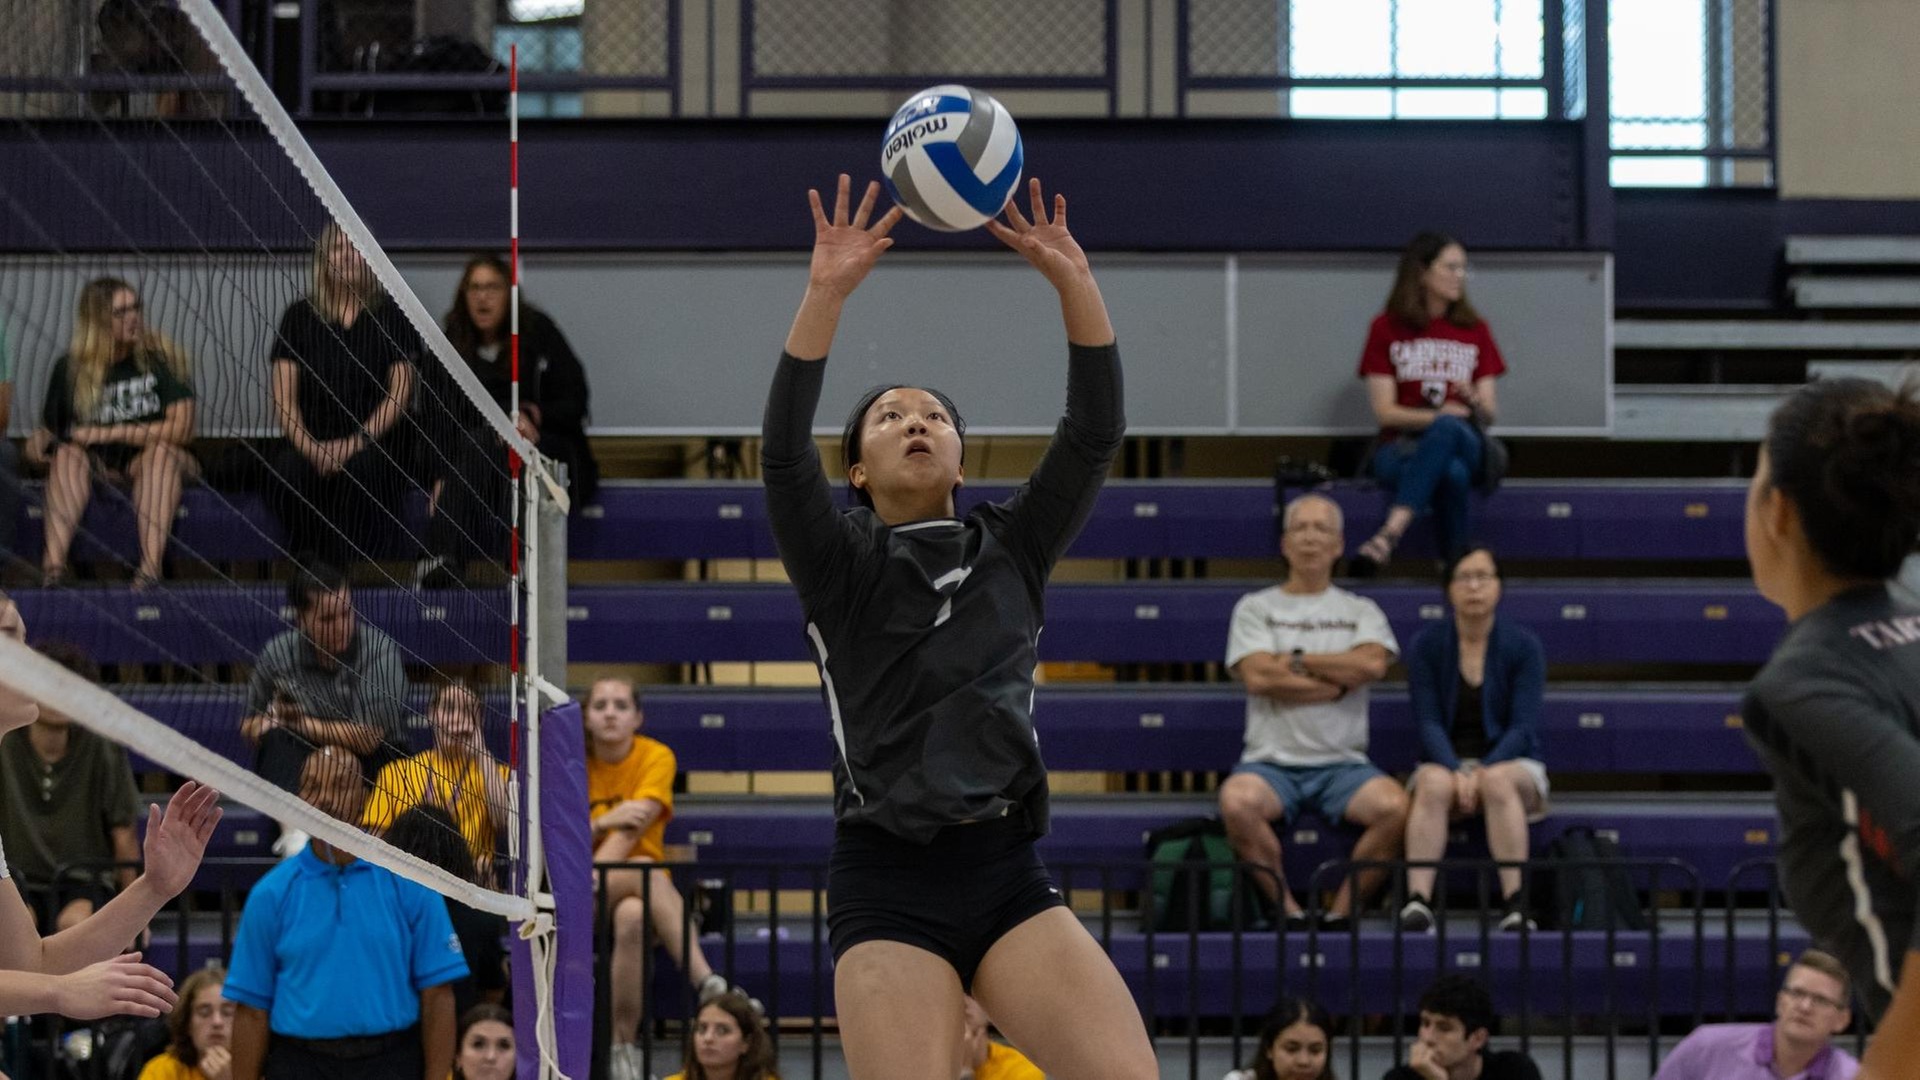 women's volleyball player jumping to set the ball near the net